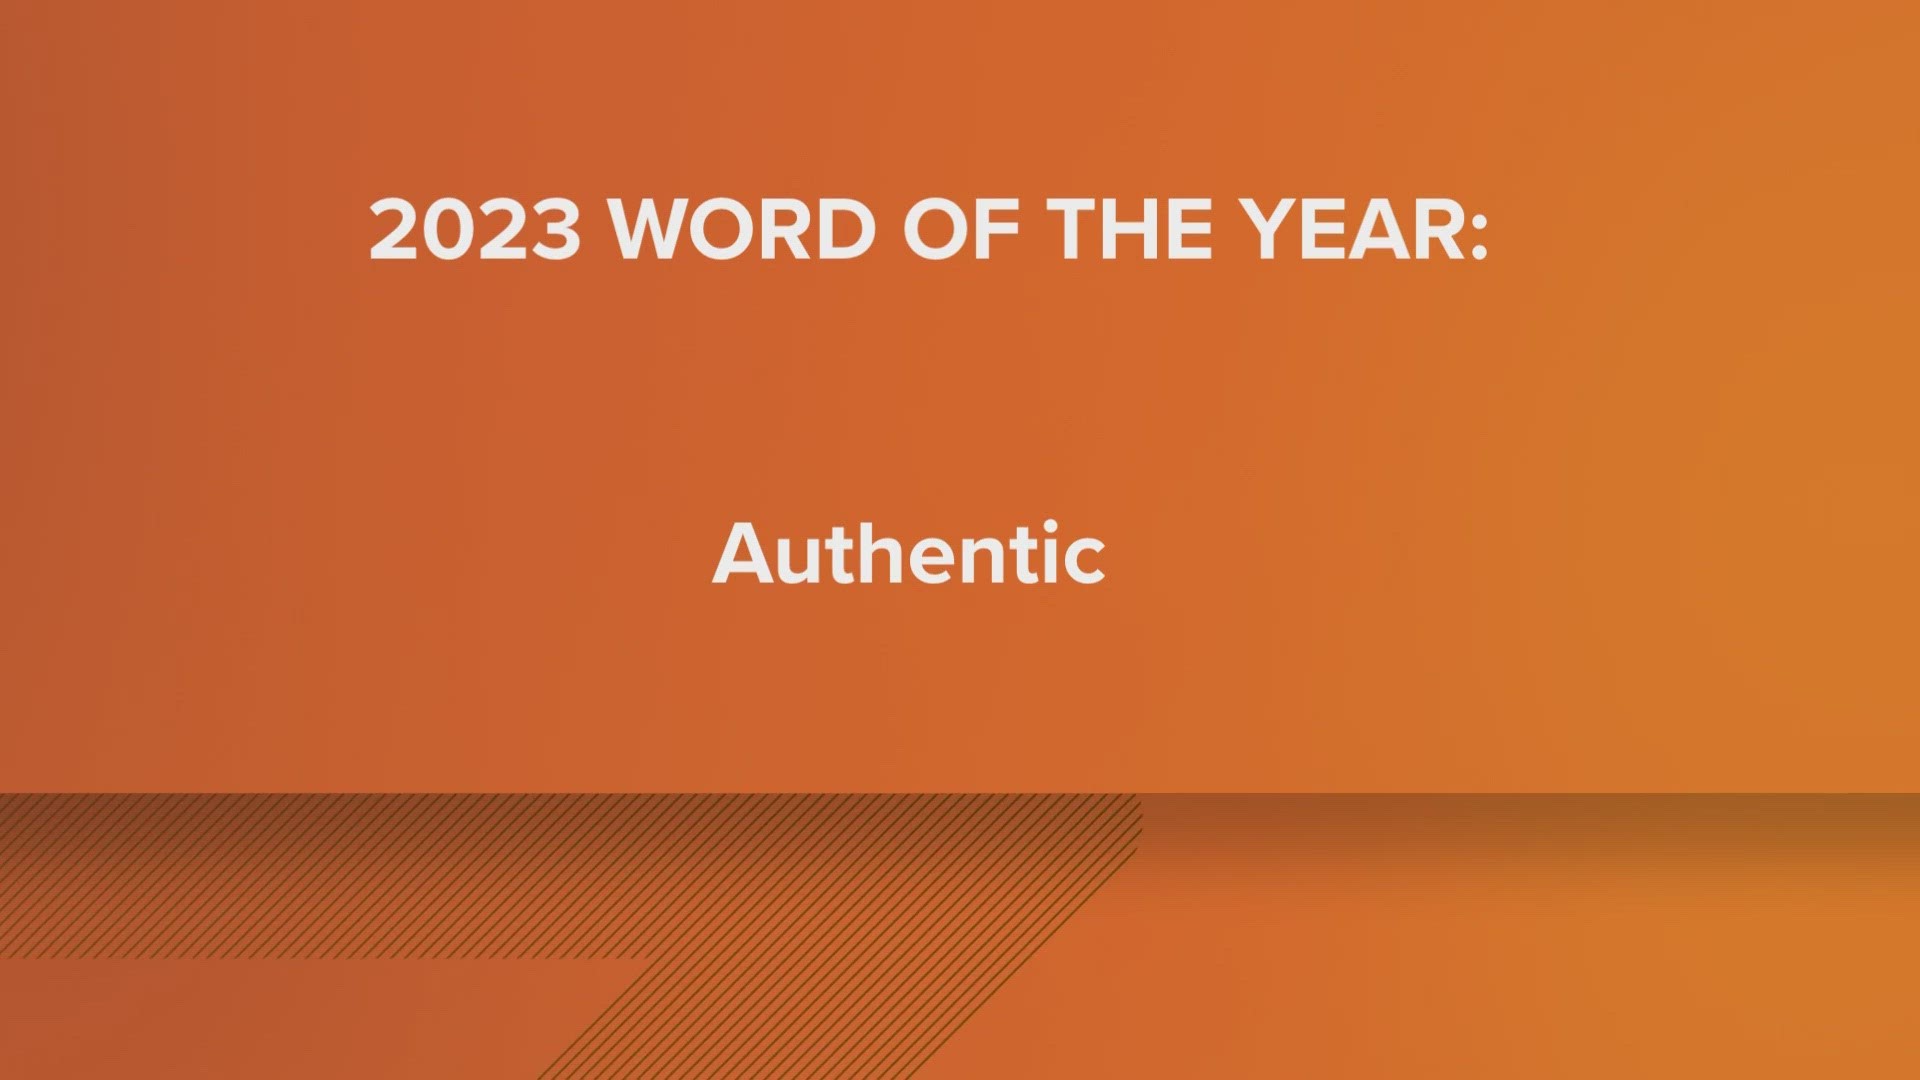 And the word is..... Authentic